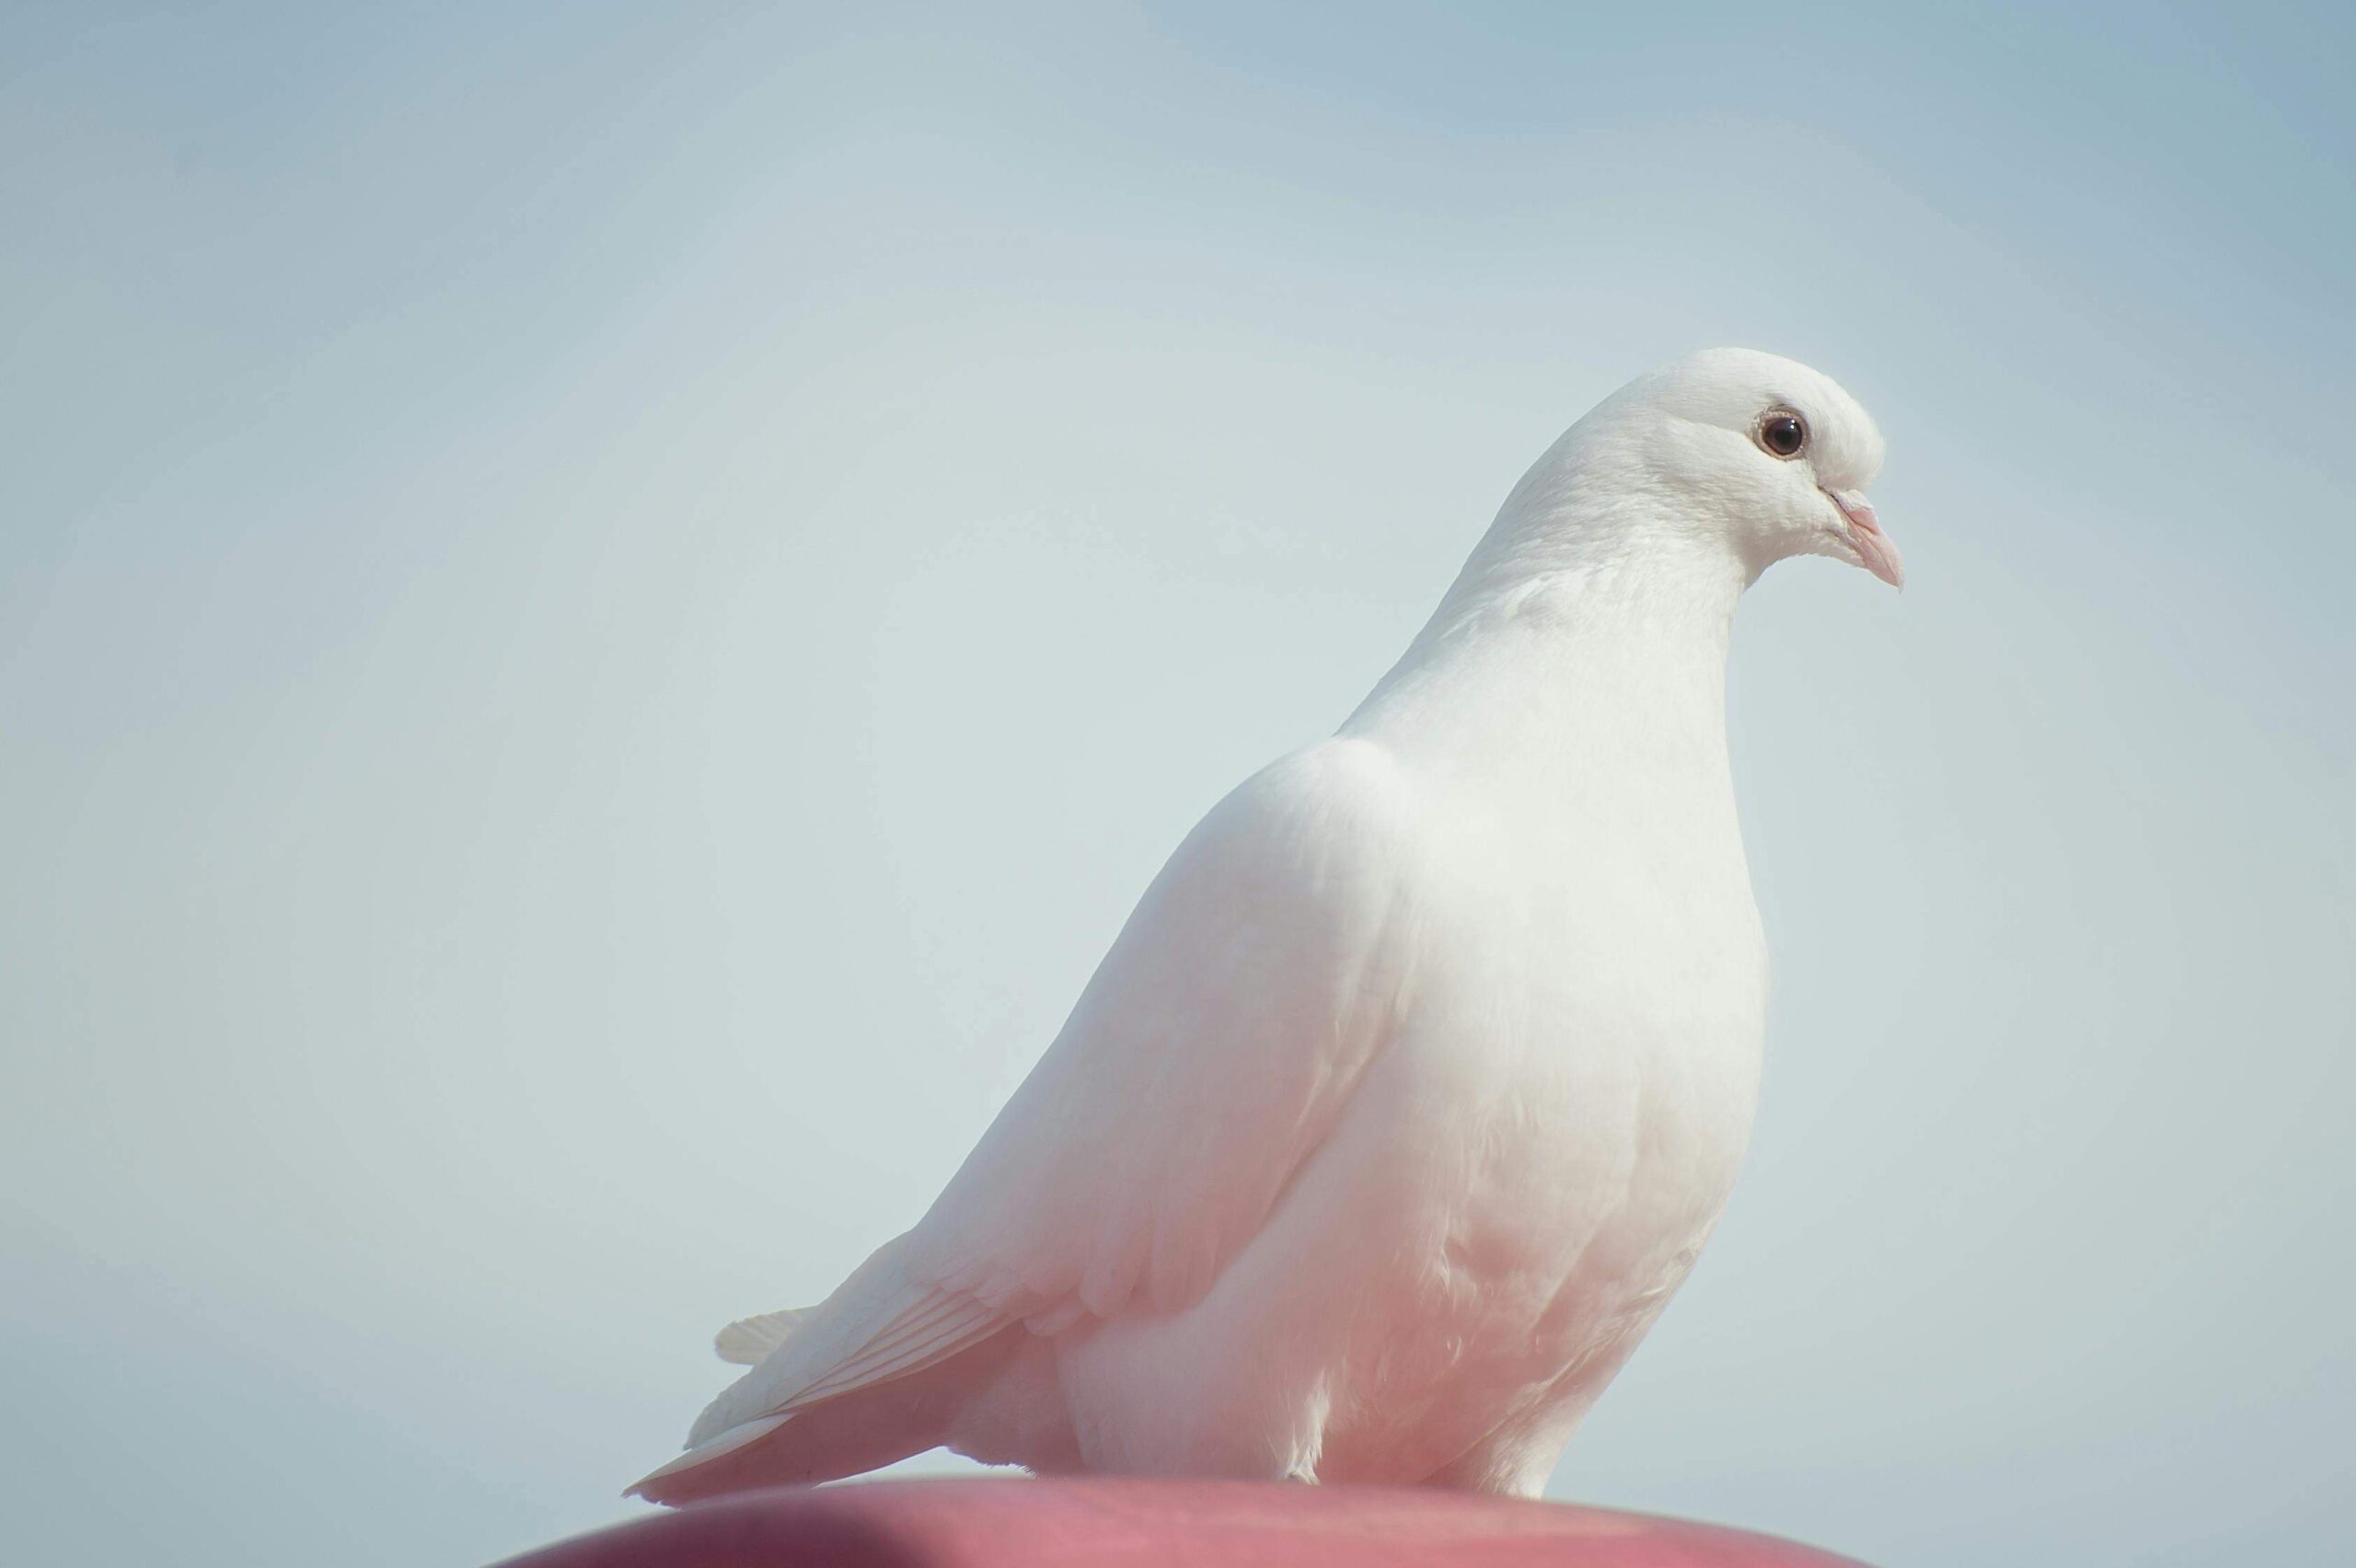 The Spiritual Meaning of Seeing White Birds